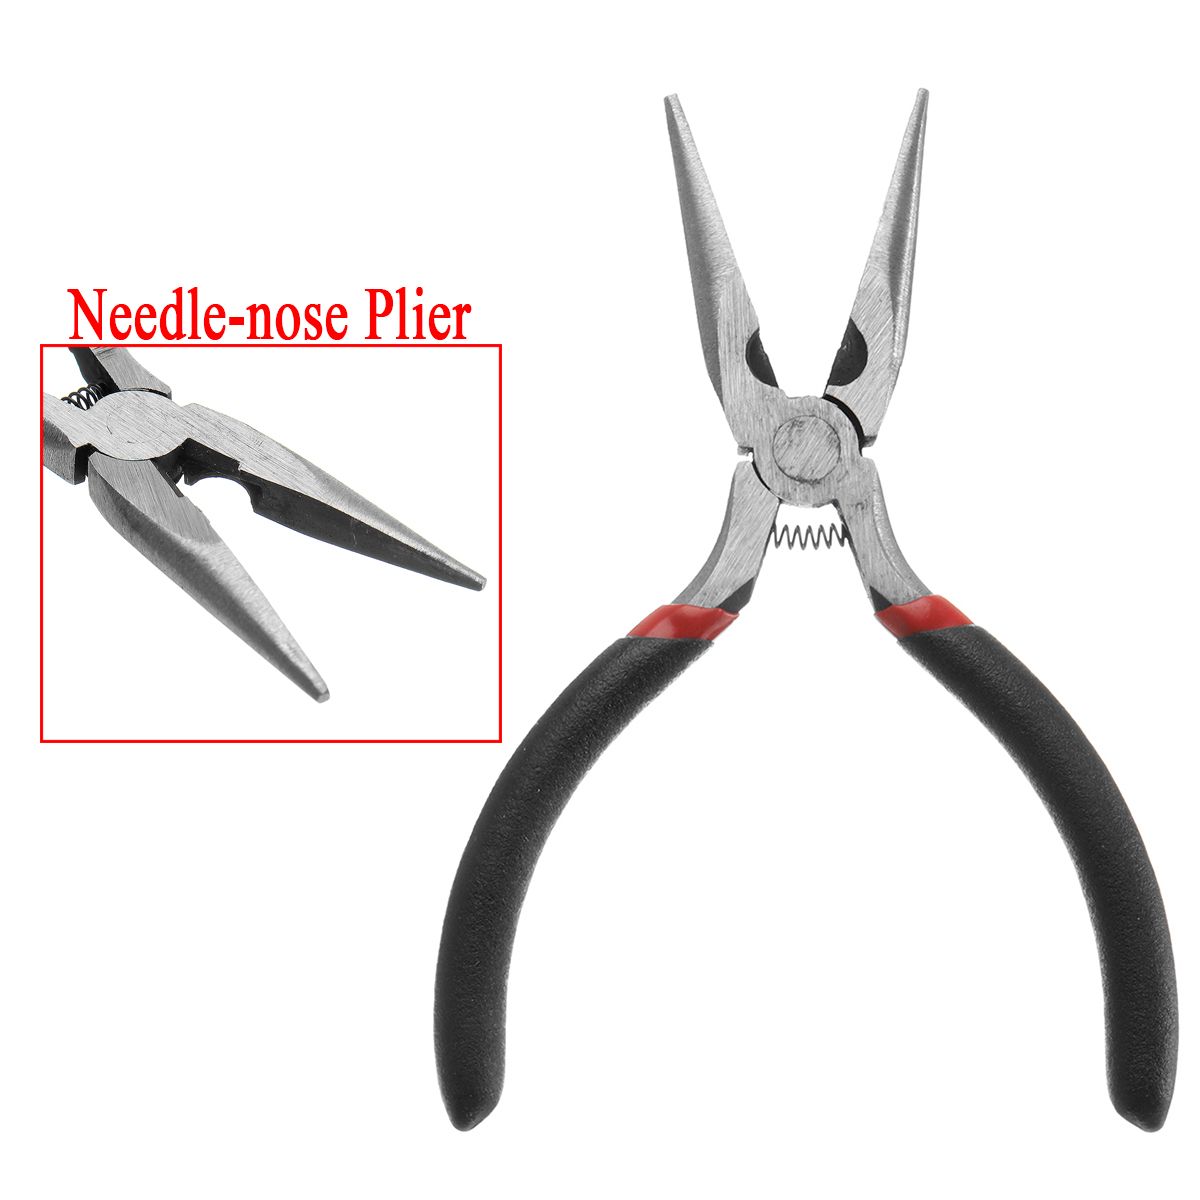 Jewelry-Beading-Making-Mini-Pliers-Wire-Bending-Beads-Pliers-Craft-DIY-Hand-Tools-1441580